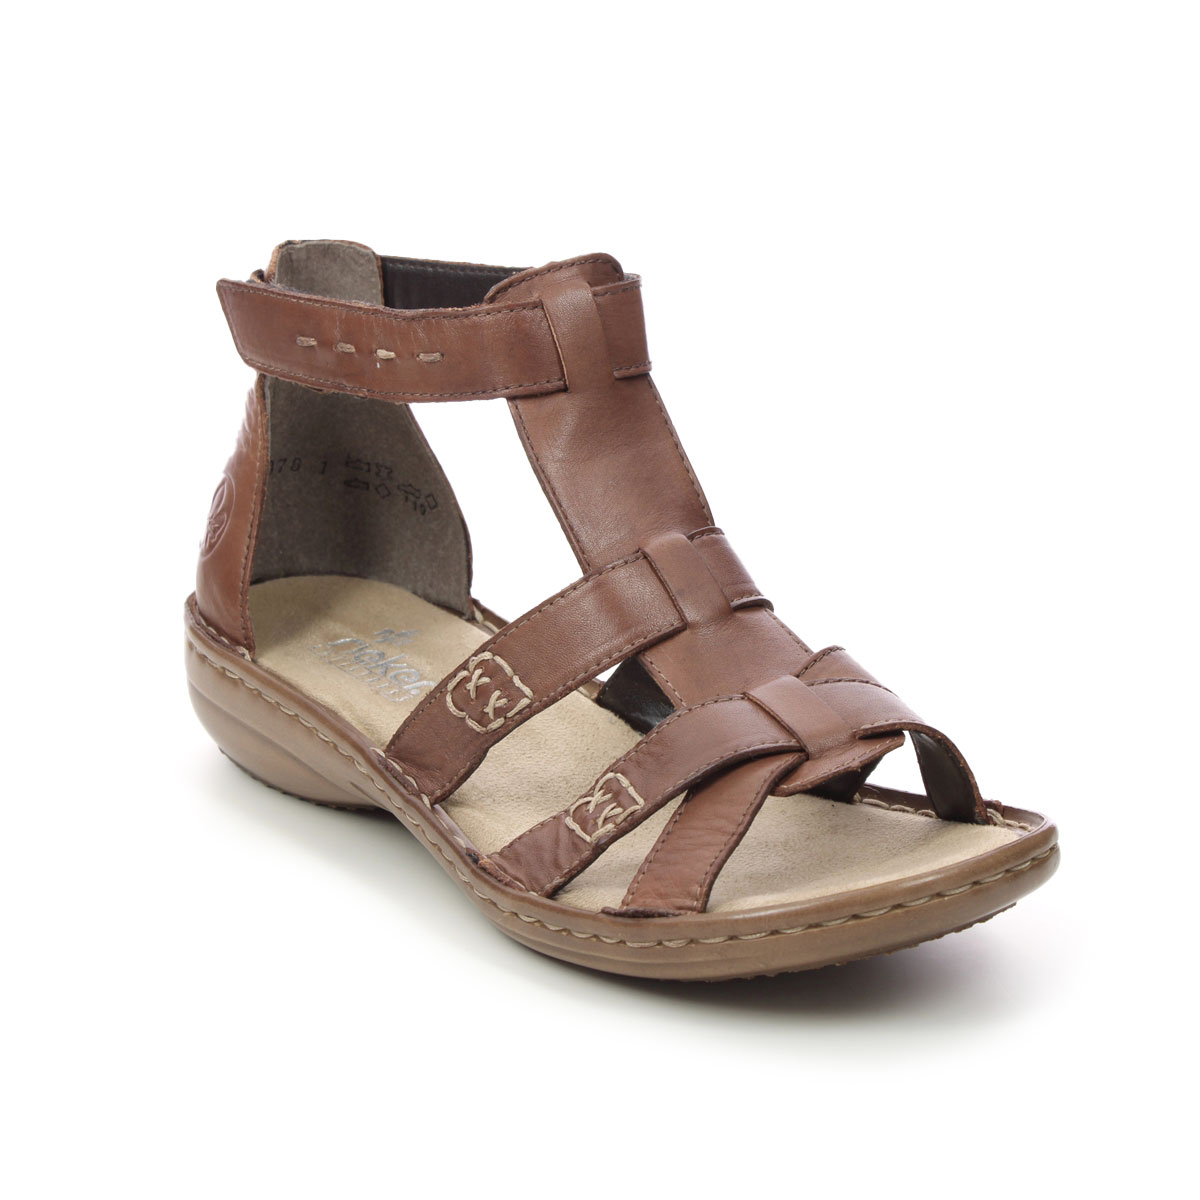 Rieker 60860-24 Tan Leather Womens Gladiator Sandals in a Plain Leather in Size 41